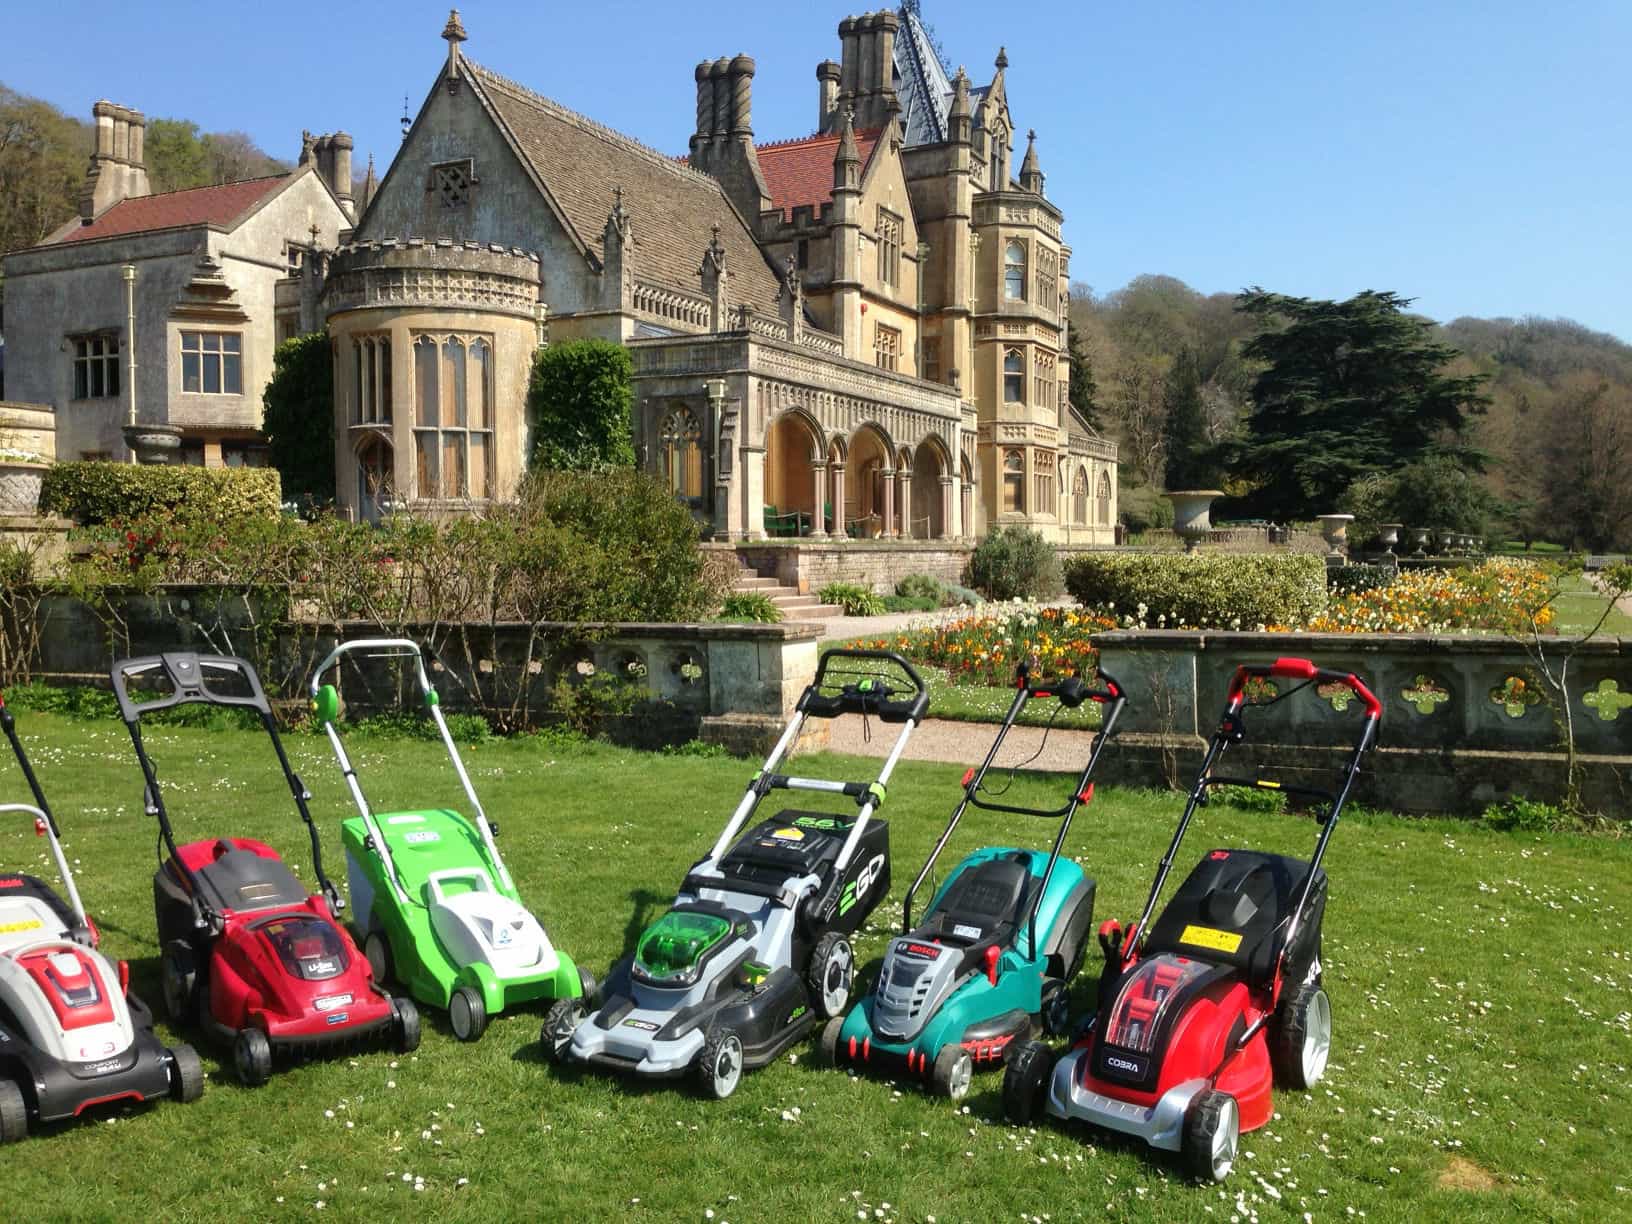 Mowers test @ Tyntesfield for the Daily Telegraph